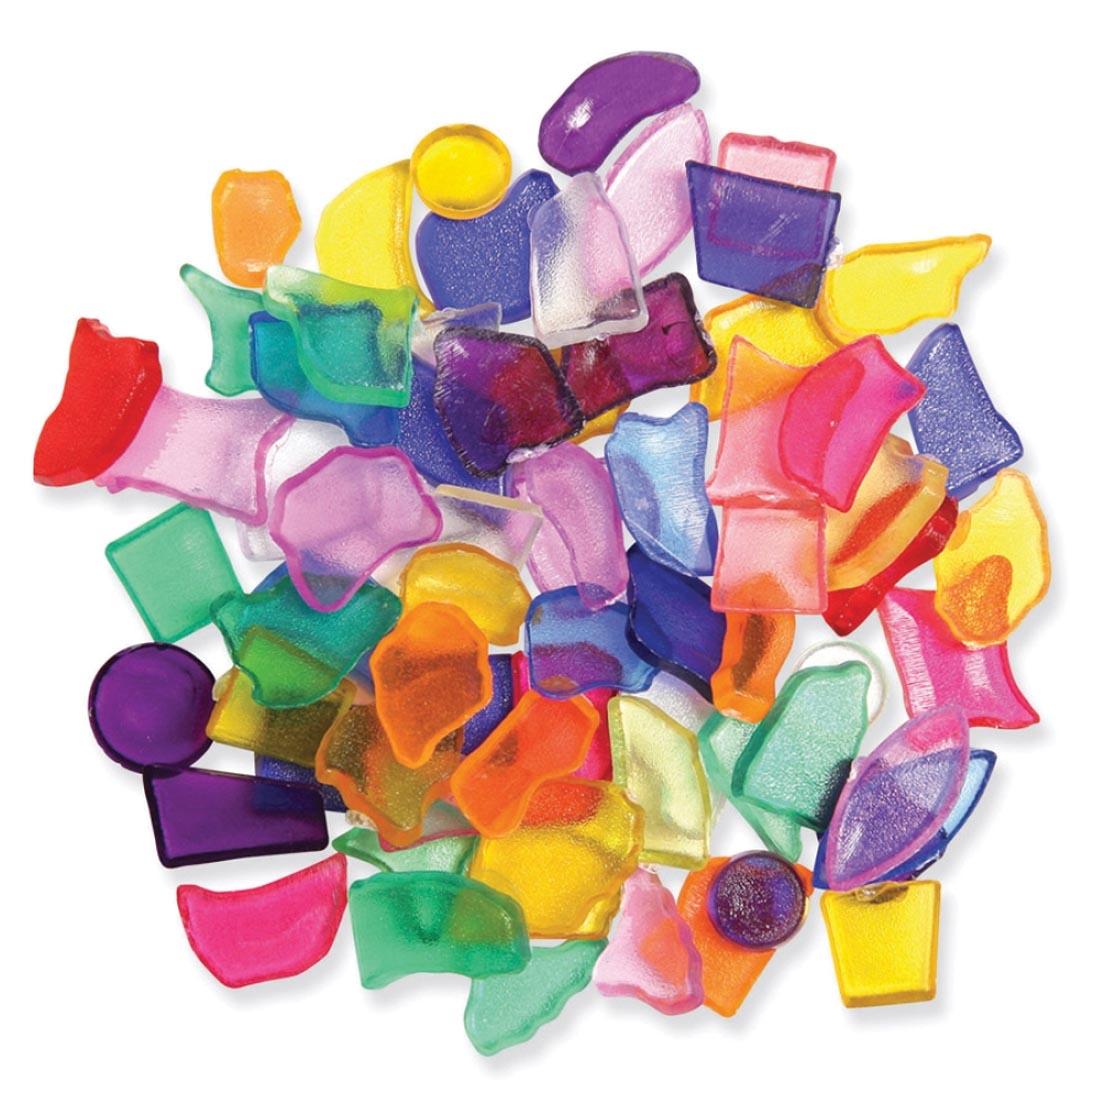 Creativity Street Plastic Mosaic Shapes in assorted sizes, shapes and colors